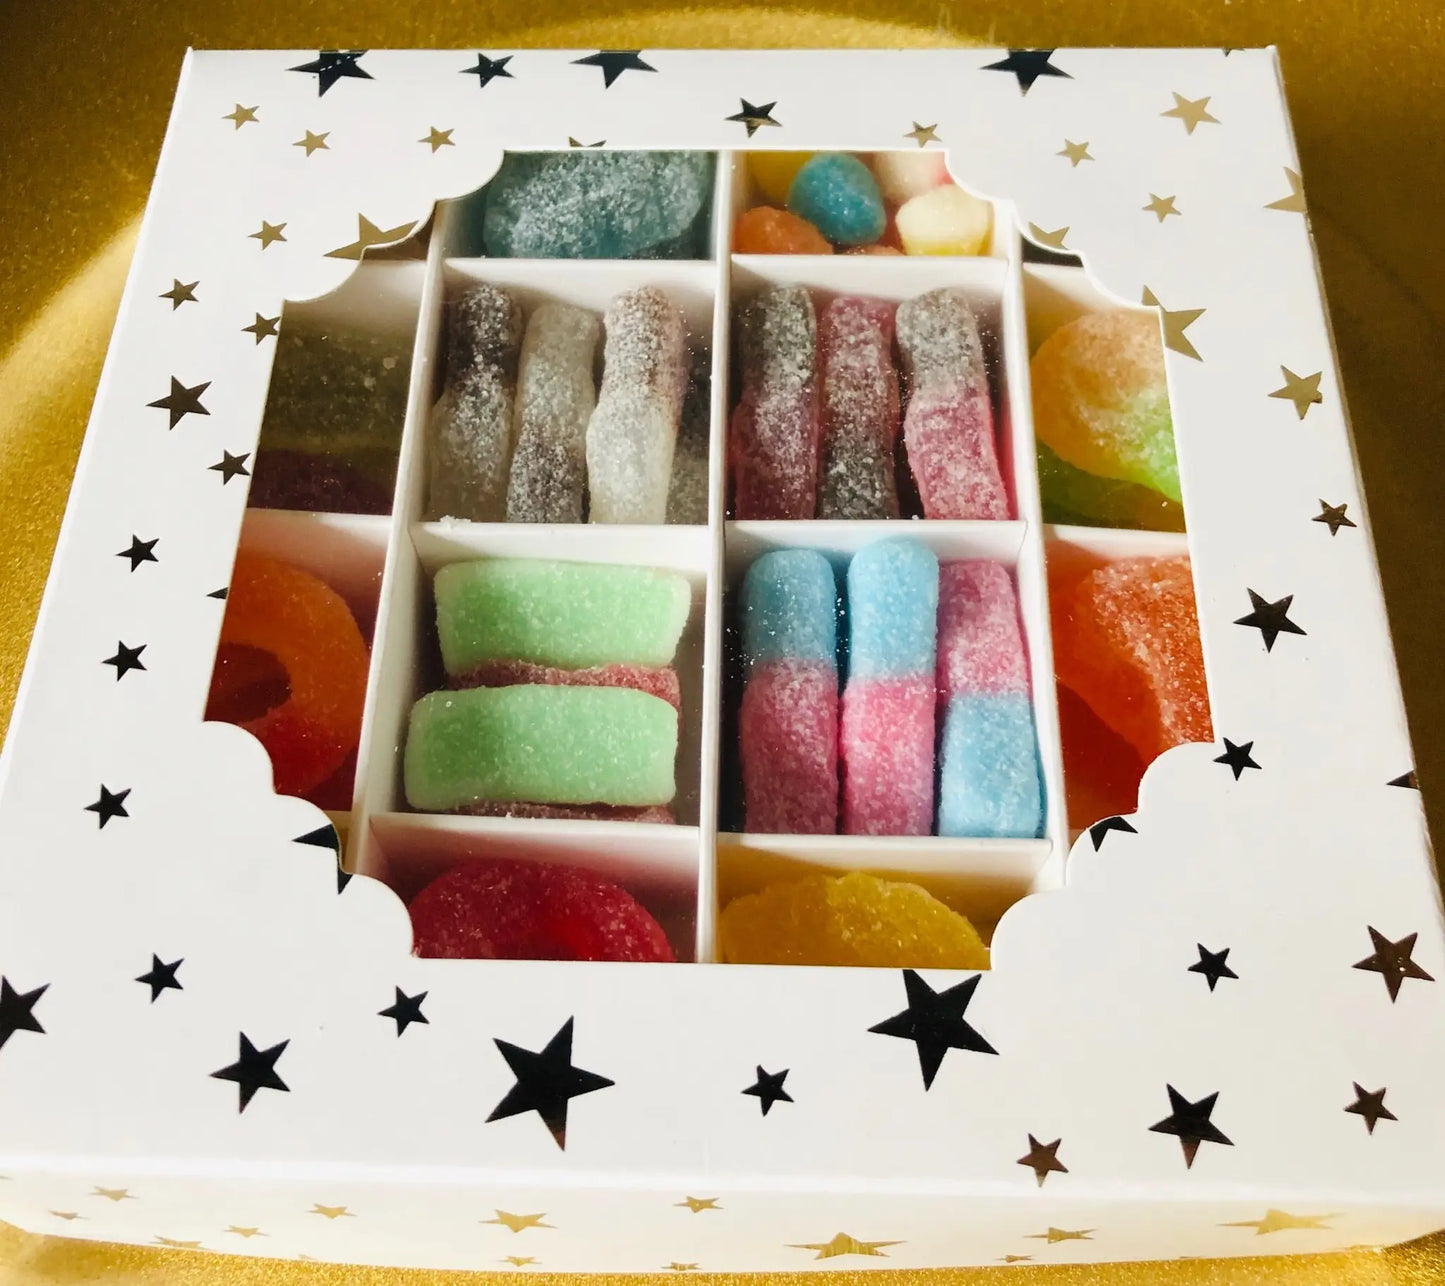 Halal friendly sweet selection mix gift box the sweet masters faire